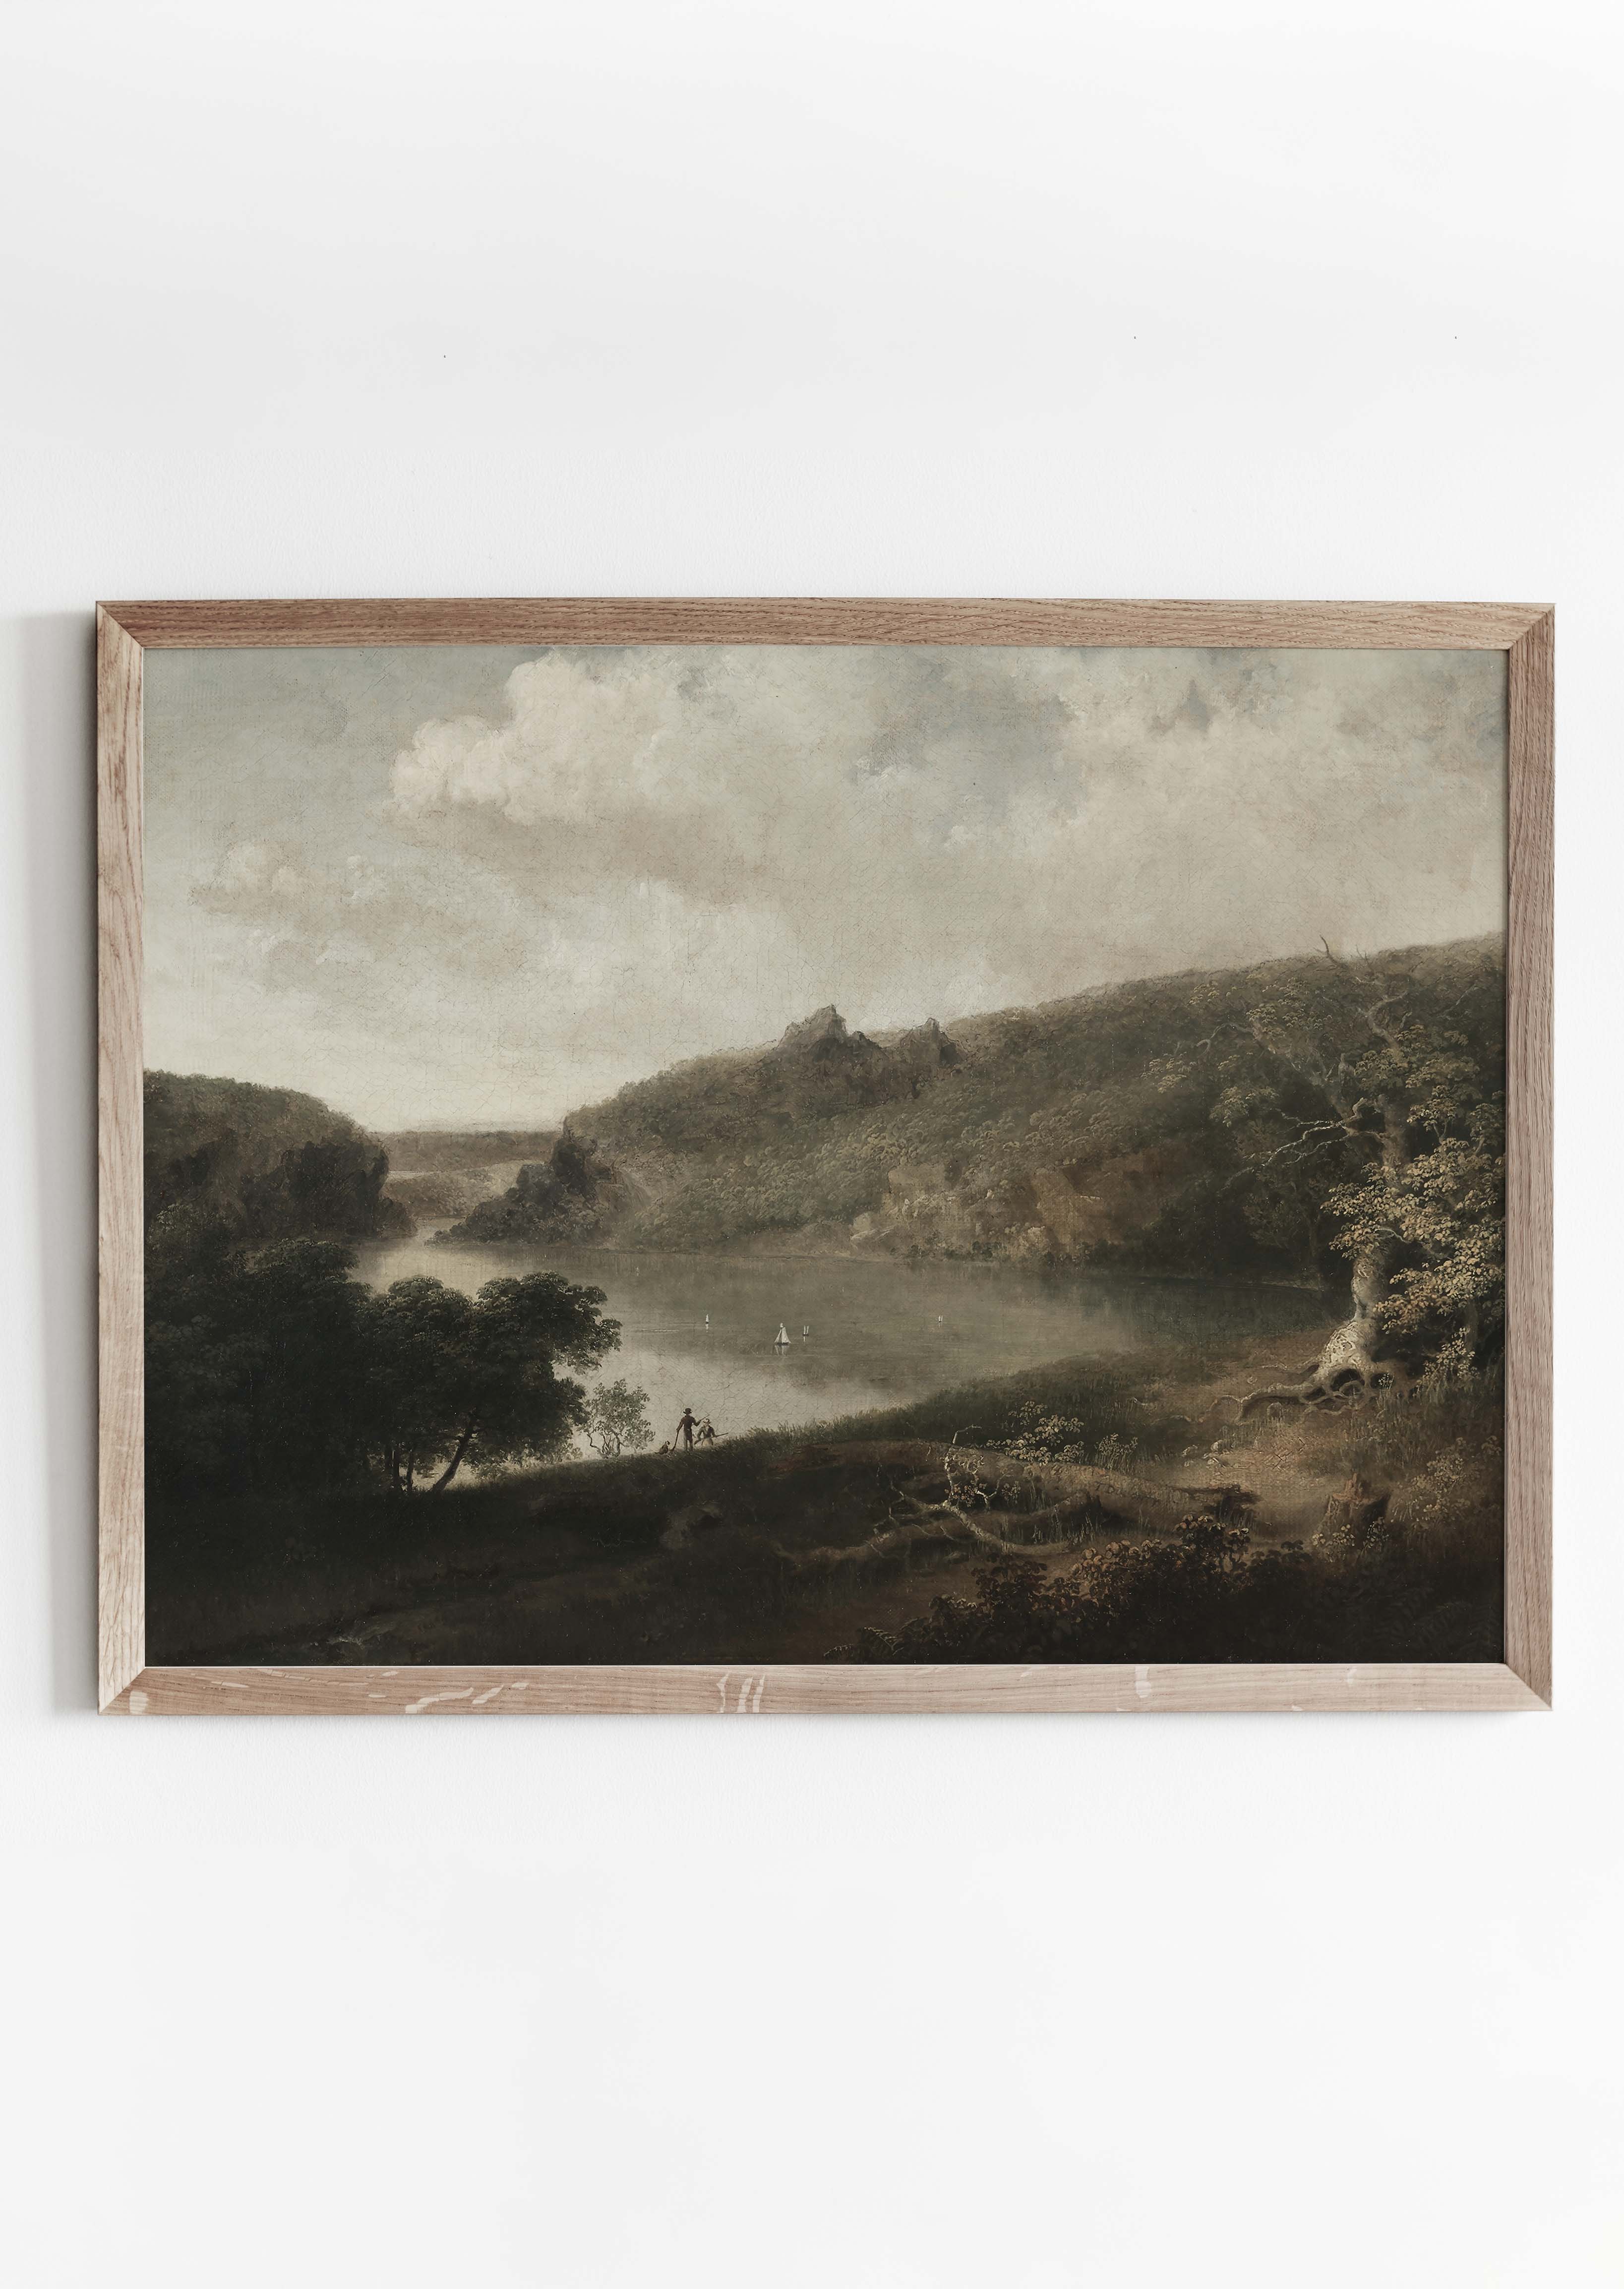 Dark Moody Lake Landscape Painting! This rustic View of a Lake was painted by the American artist Thomas Doughty 